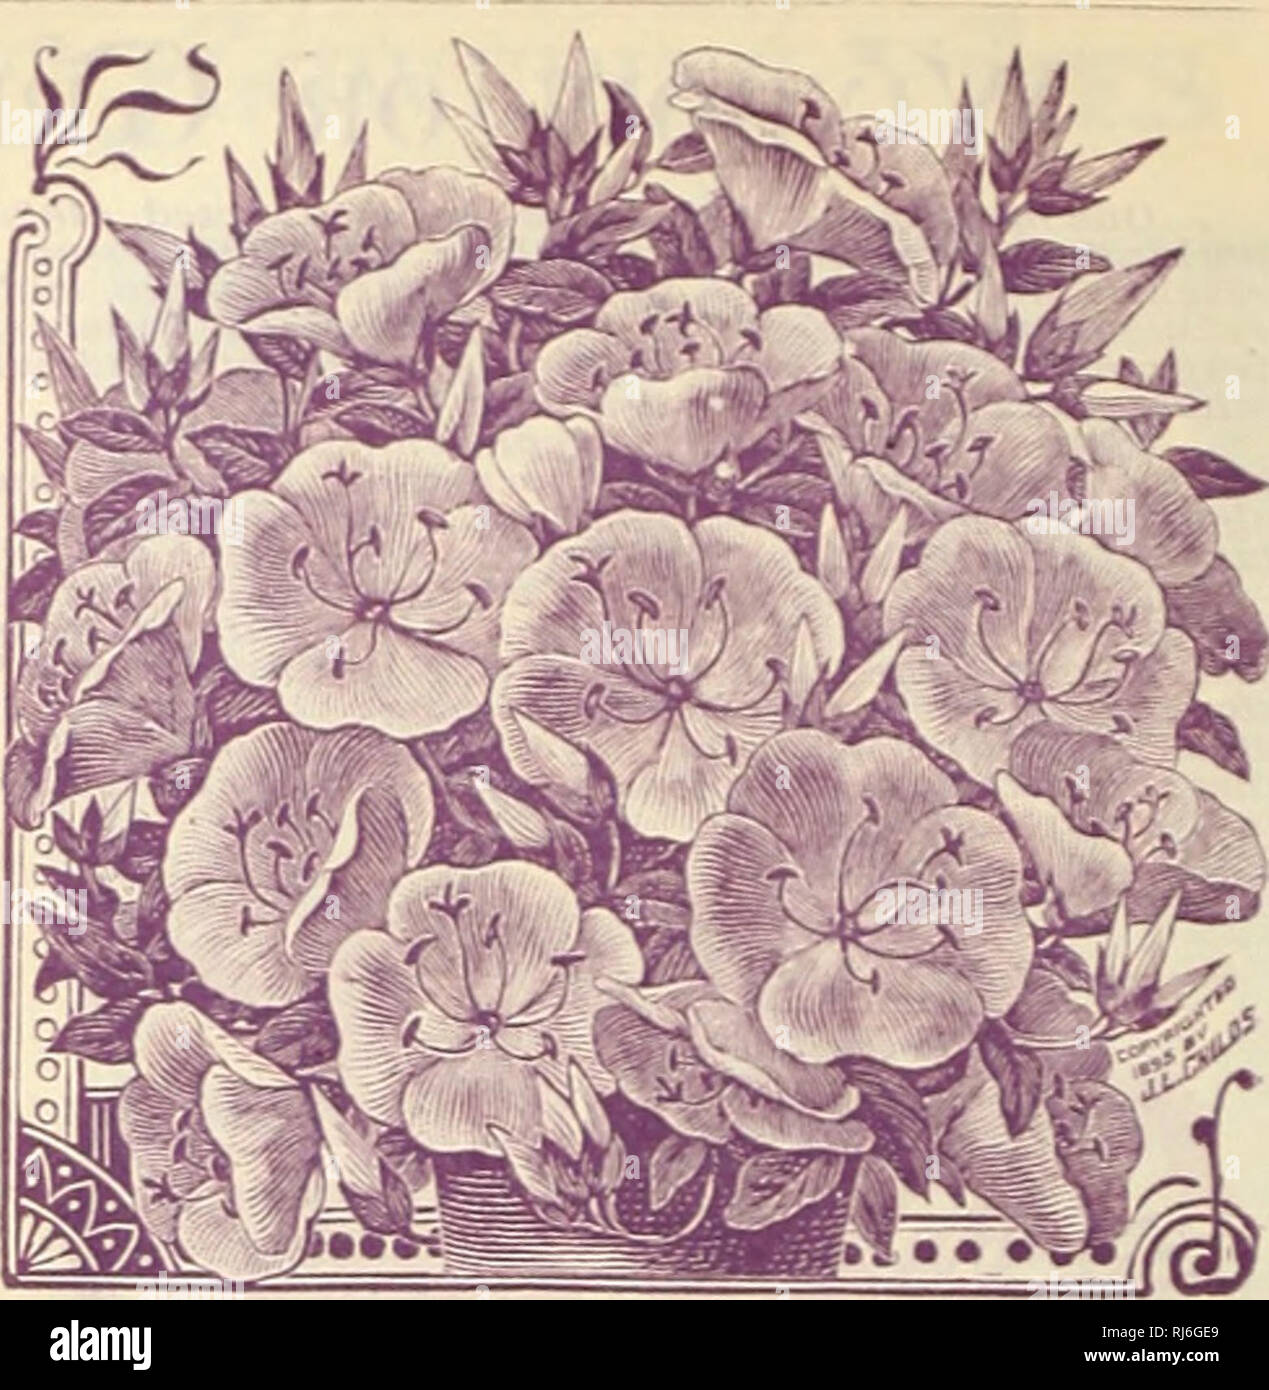 . Childs rare flowers, vegetables, and fruits. Fruit Varieties United States Catalogs; Flowers Varieties United States Catalogs; Vegetables Varieties United States Catalogs; John Lewis Childs (Firm); Fruit; Flowers; Vegetables. No other kinds of flowering Begonias can begin to coni- eare with the varities of B. Vernon for beauty and constant loom. They are so much superior to others that we have concluded to offer none but these. Plants flower perpetually all the year round, the plant being completely covered with bloom at all times, especially during winter. They make lovely budding plants in Stock Photo